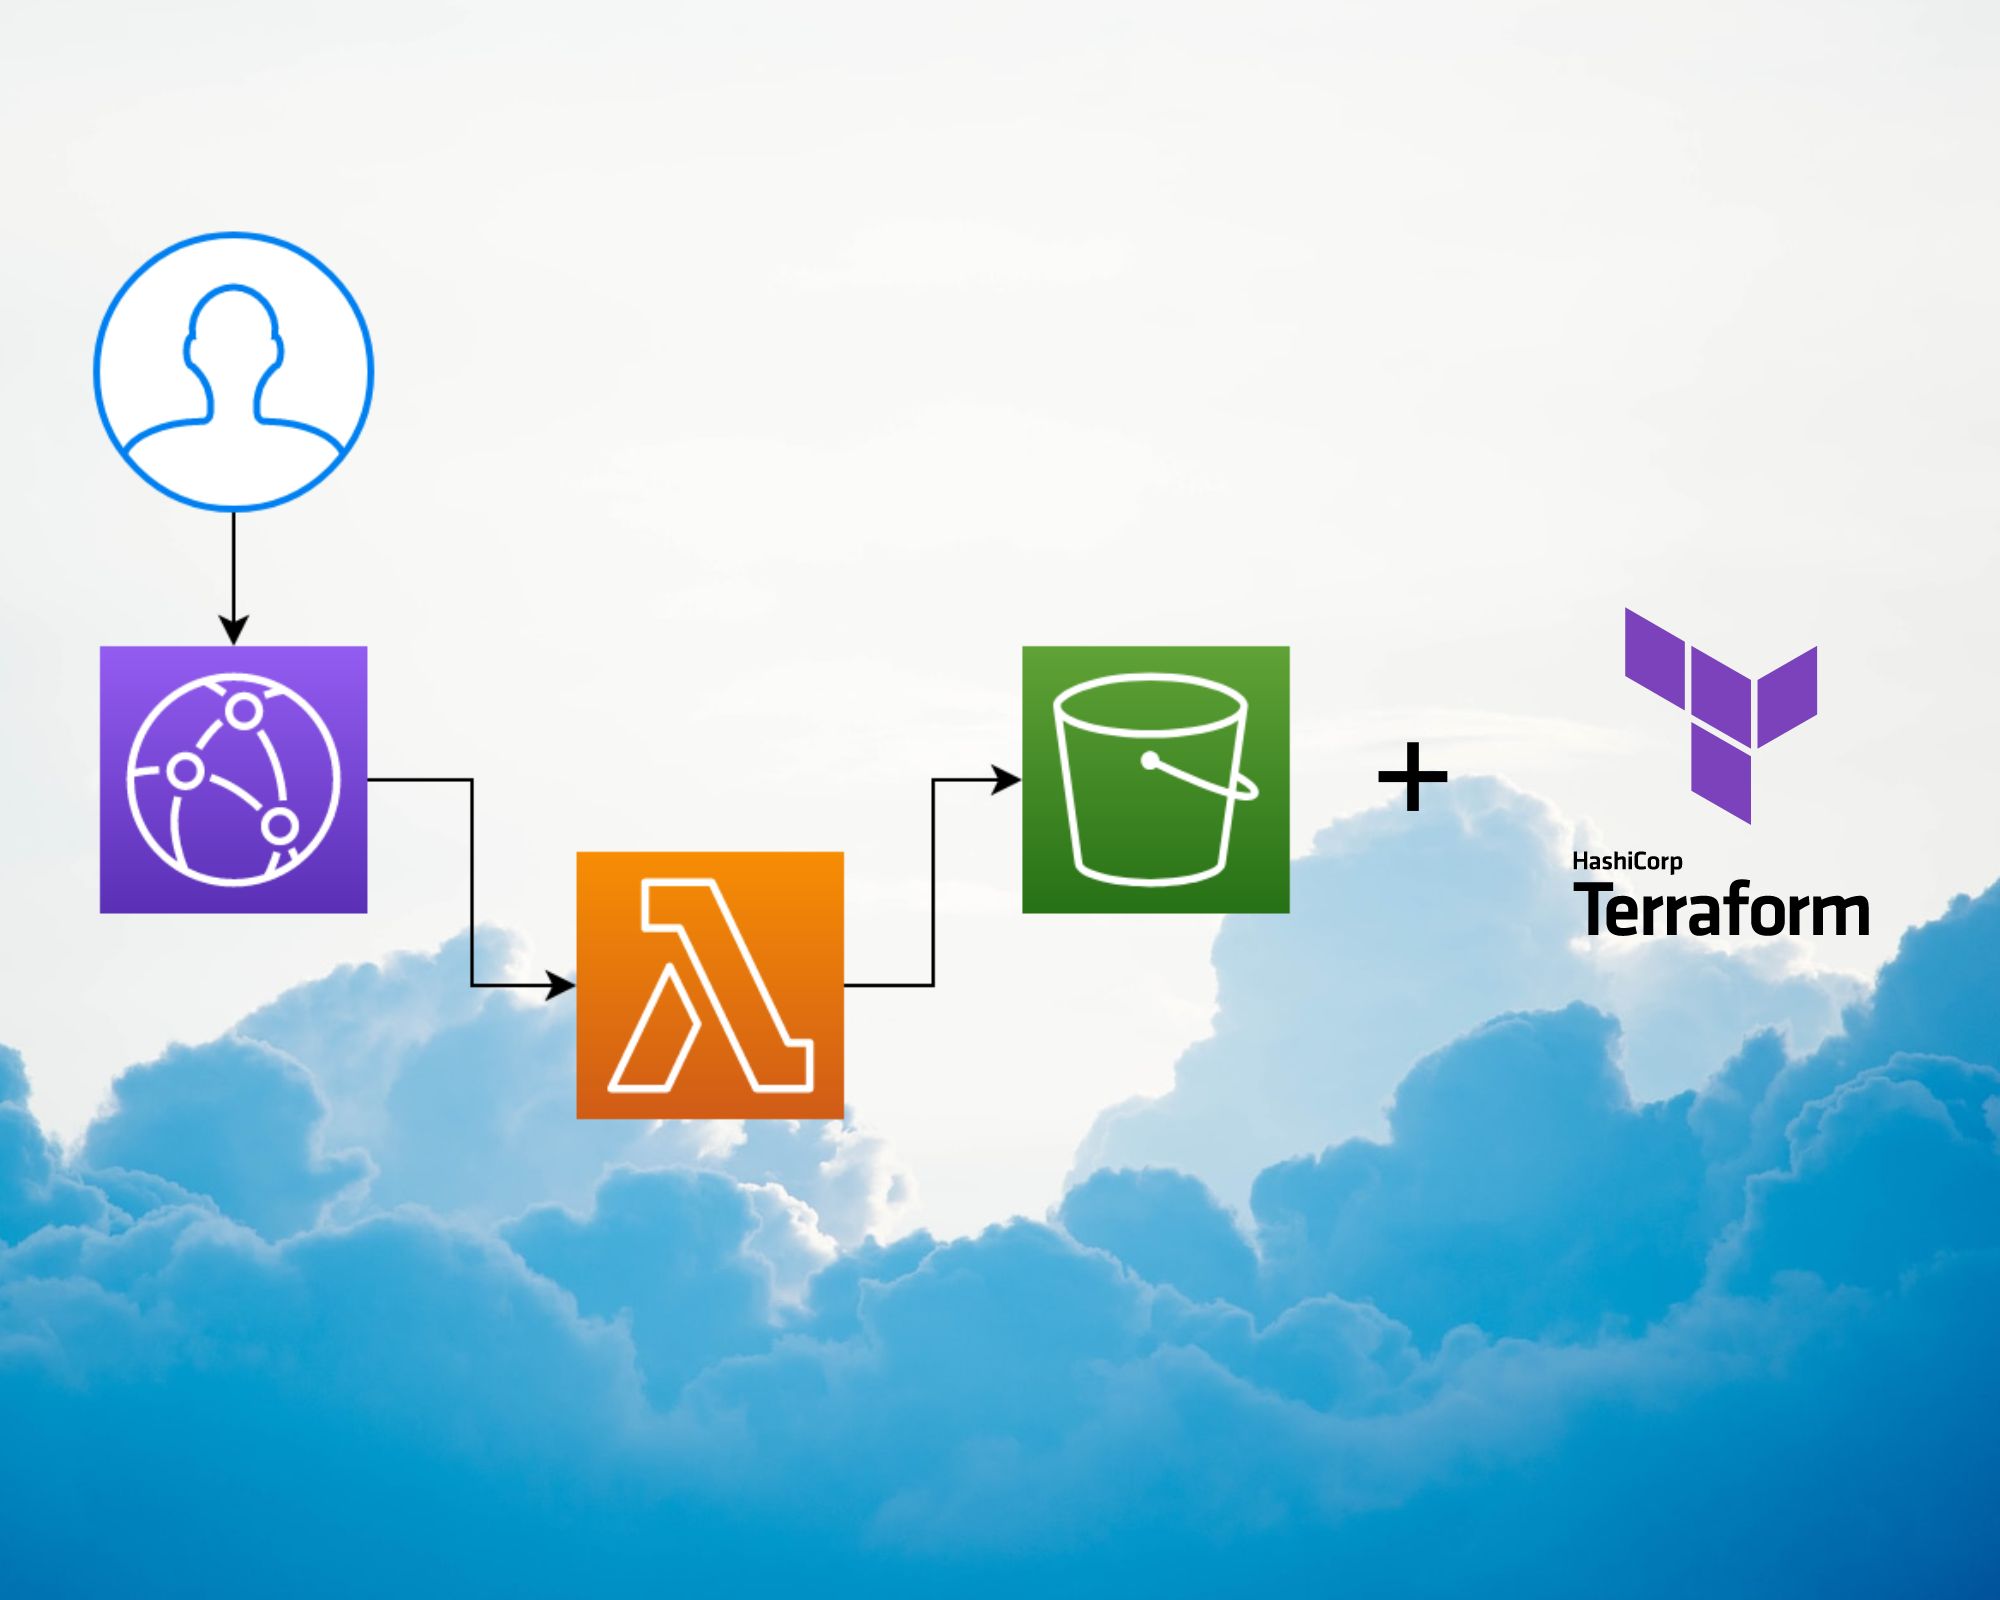 Serve binary content with AWS Lambda and AWS CloudFront, managed by Terraform.